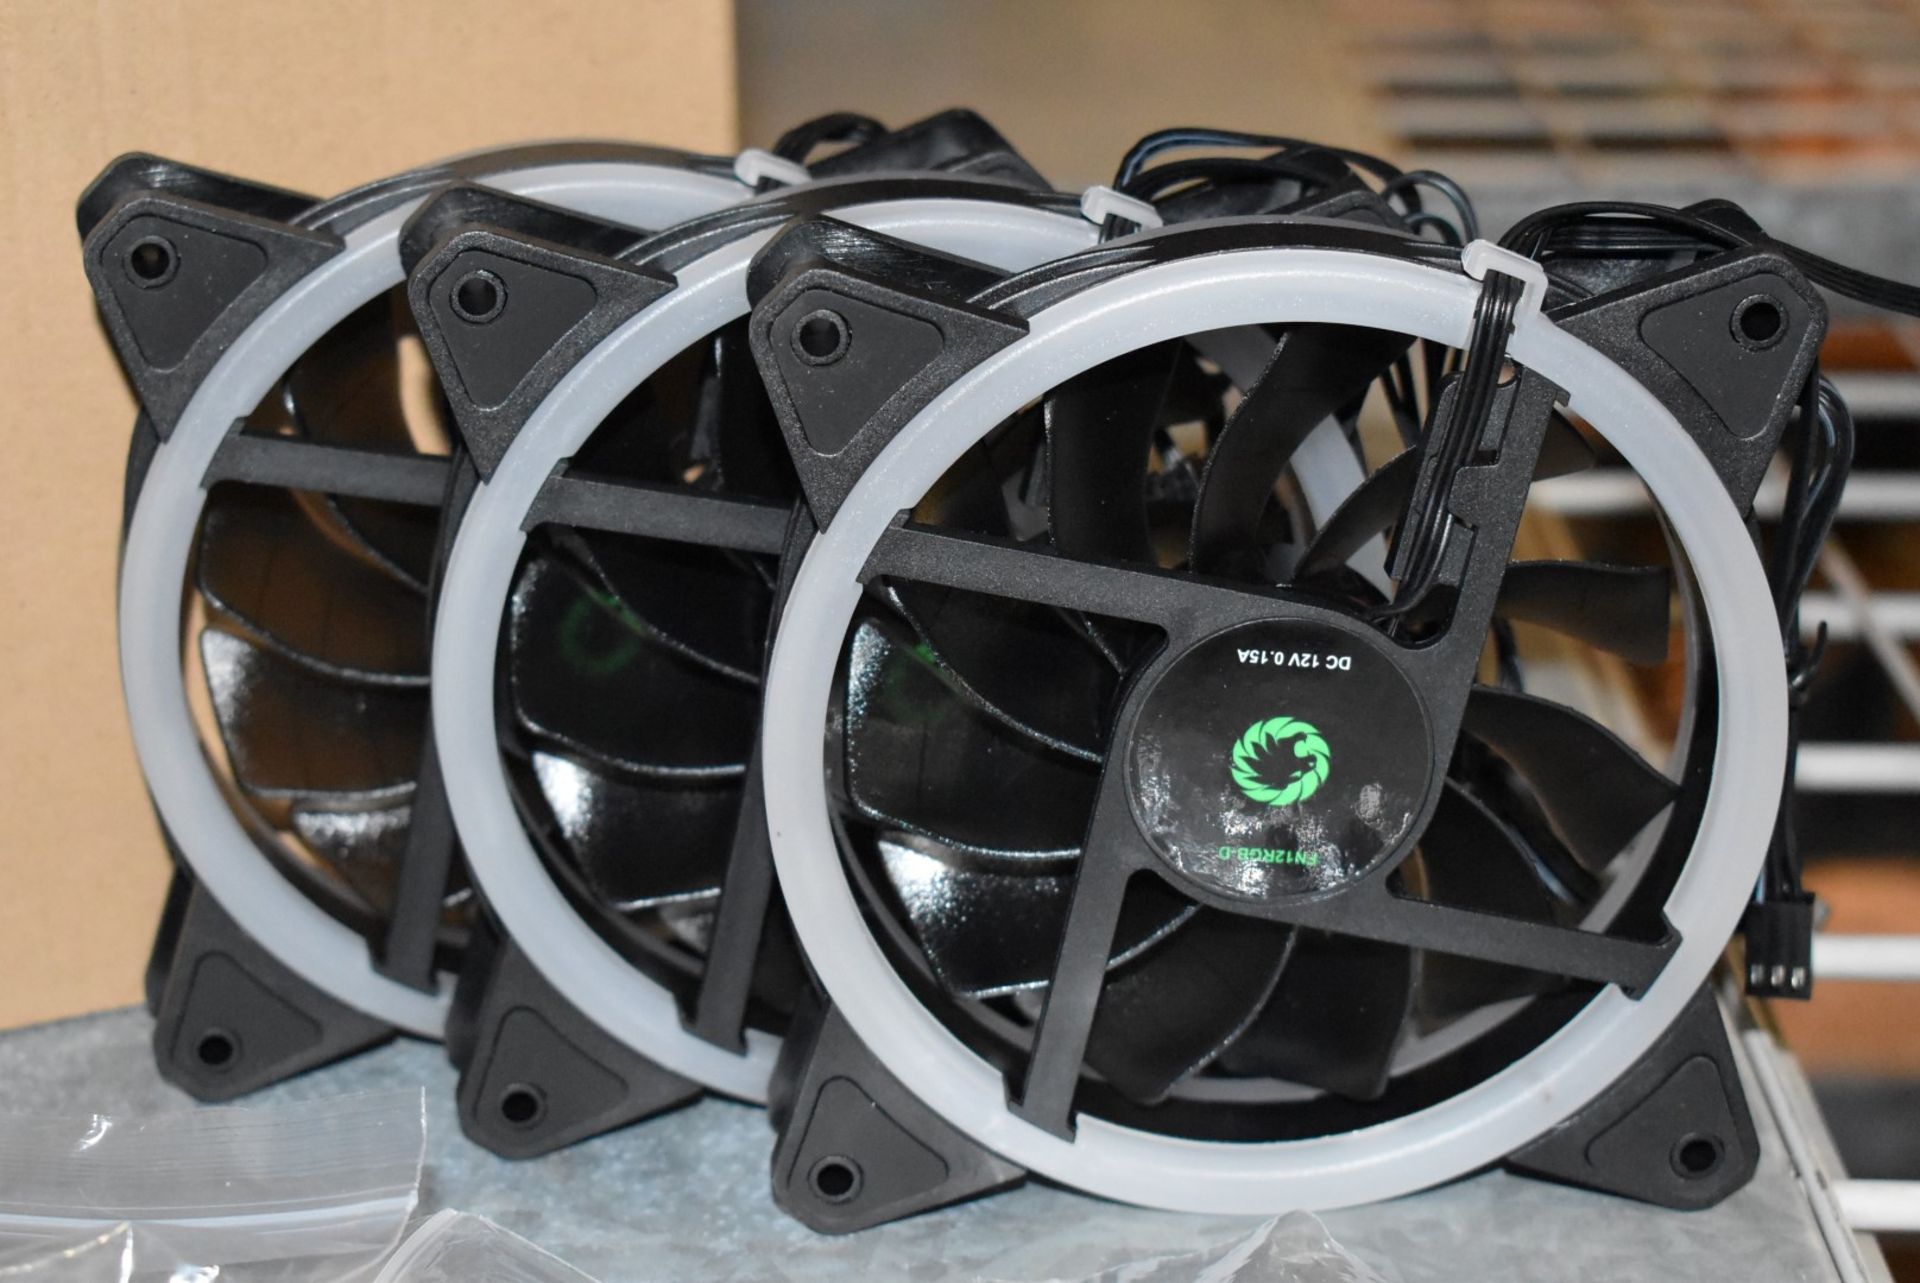 10 x GameMax LED Fan Packs For PC Gaming Cases - Each Packs Include 3 x 120mm LED Case Fans - Image 2 of 8